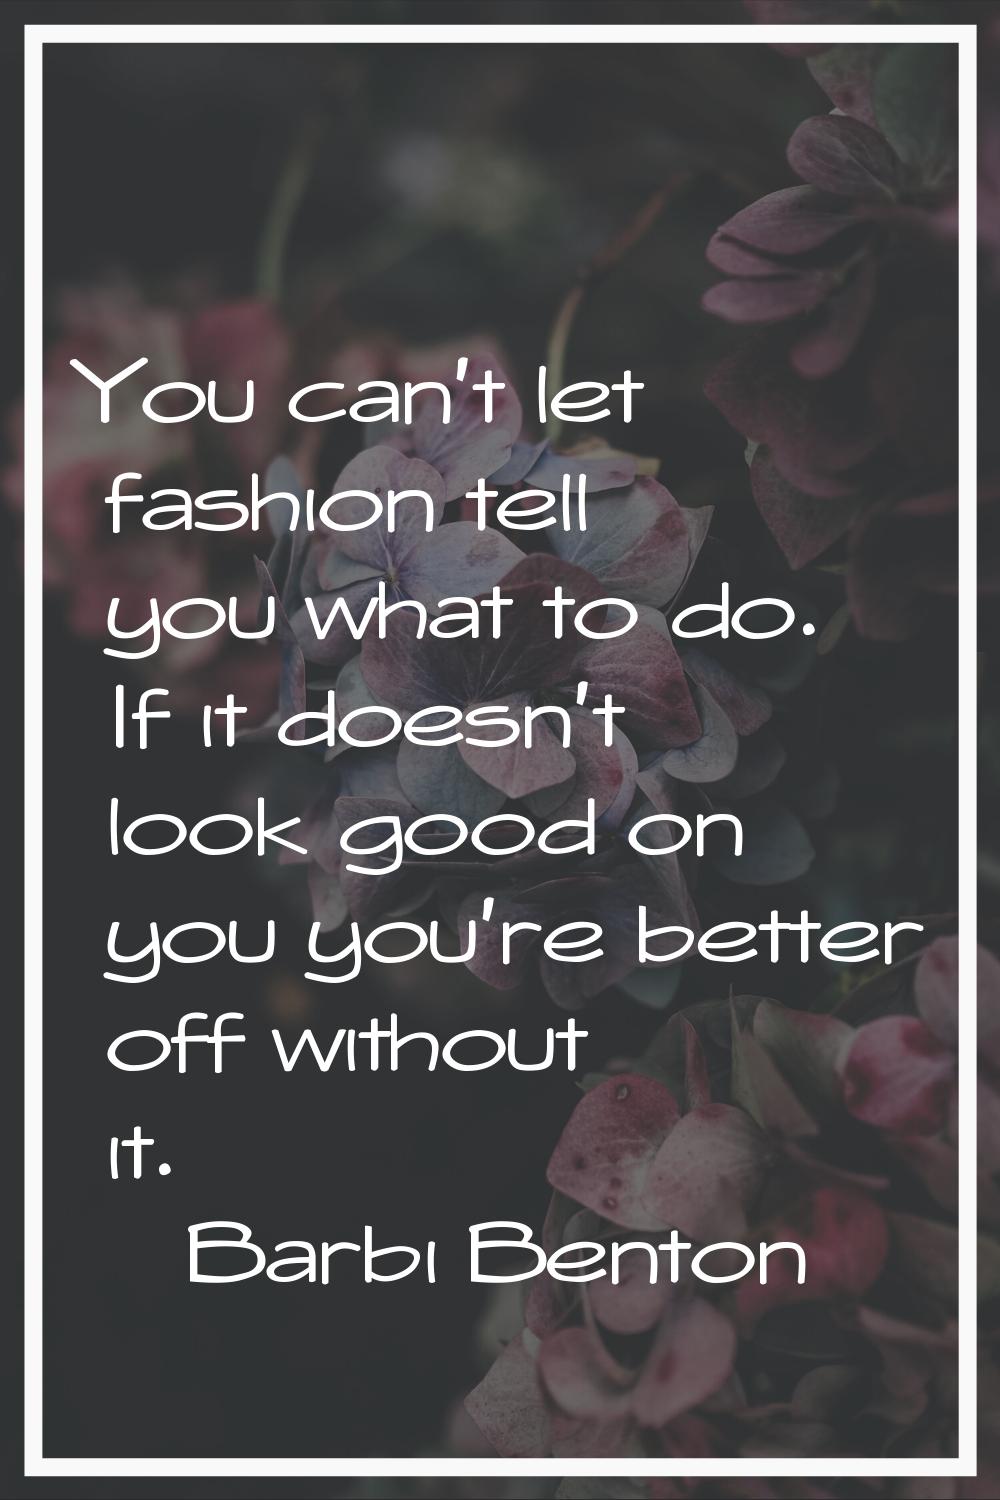 You can't let fashion tell you what to do. If it doesn't look good on you you're better off without